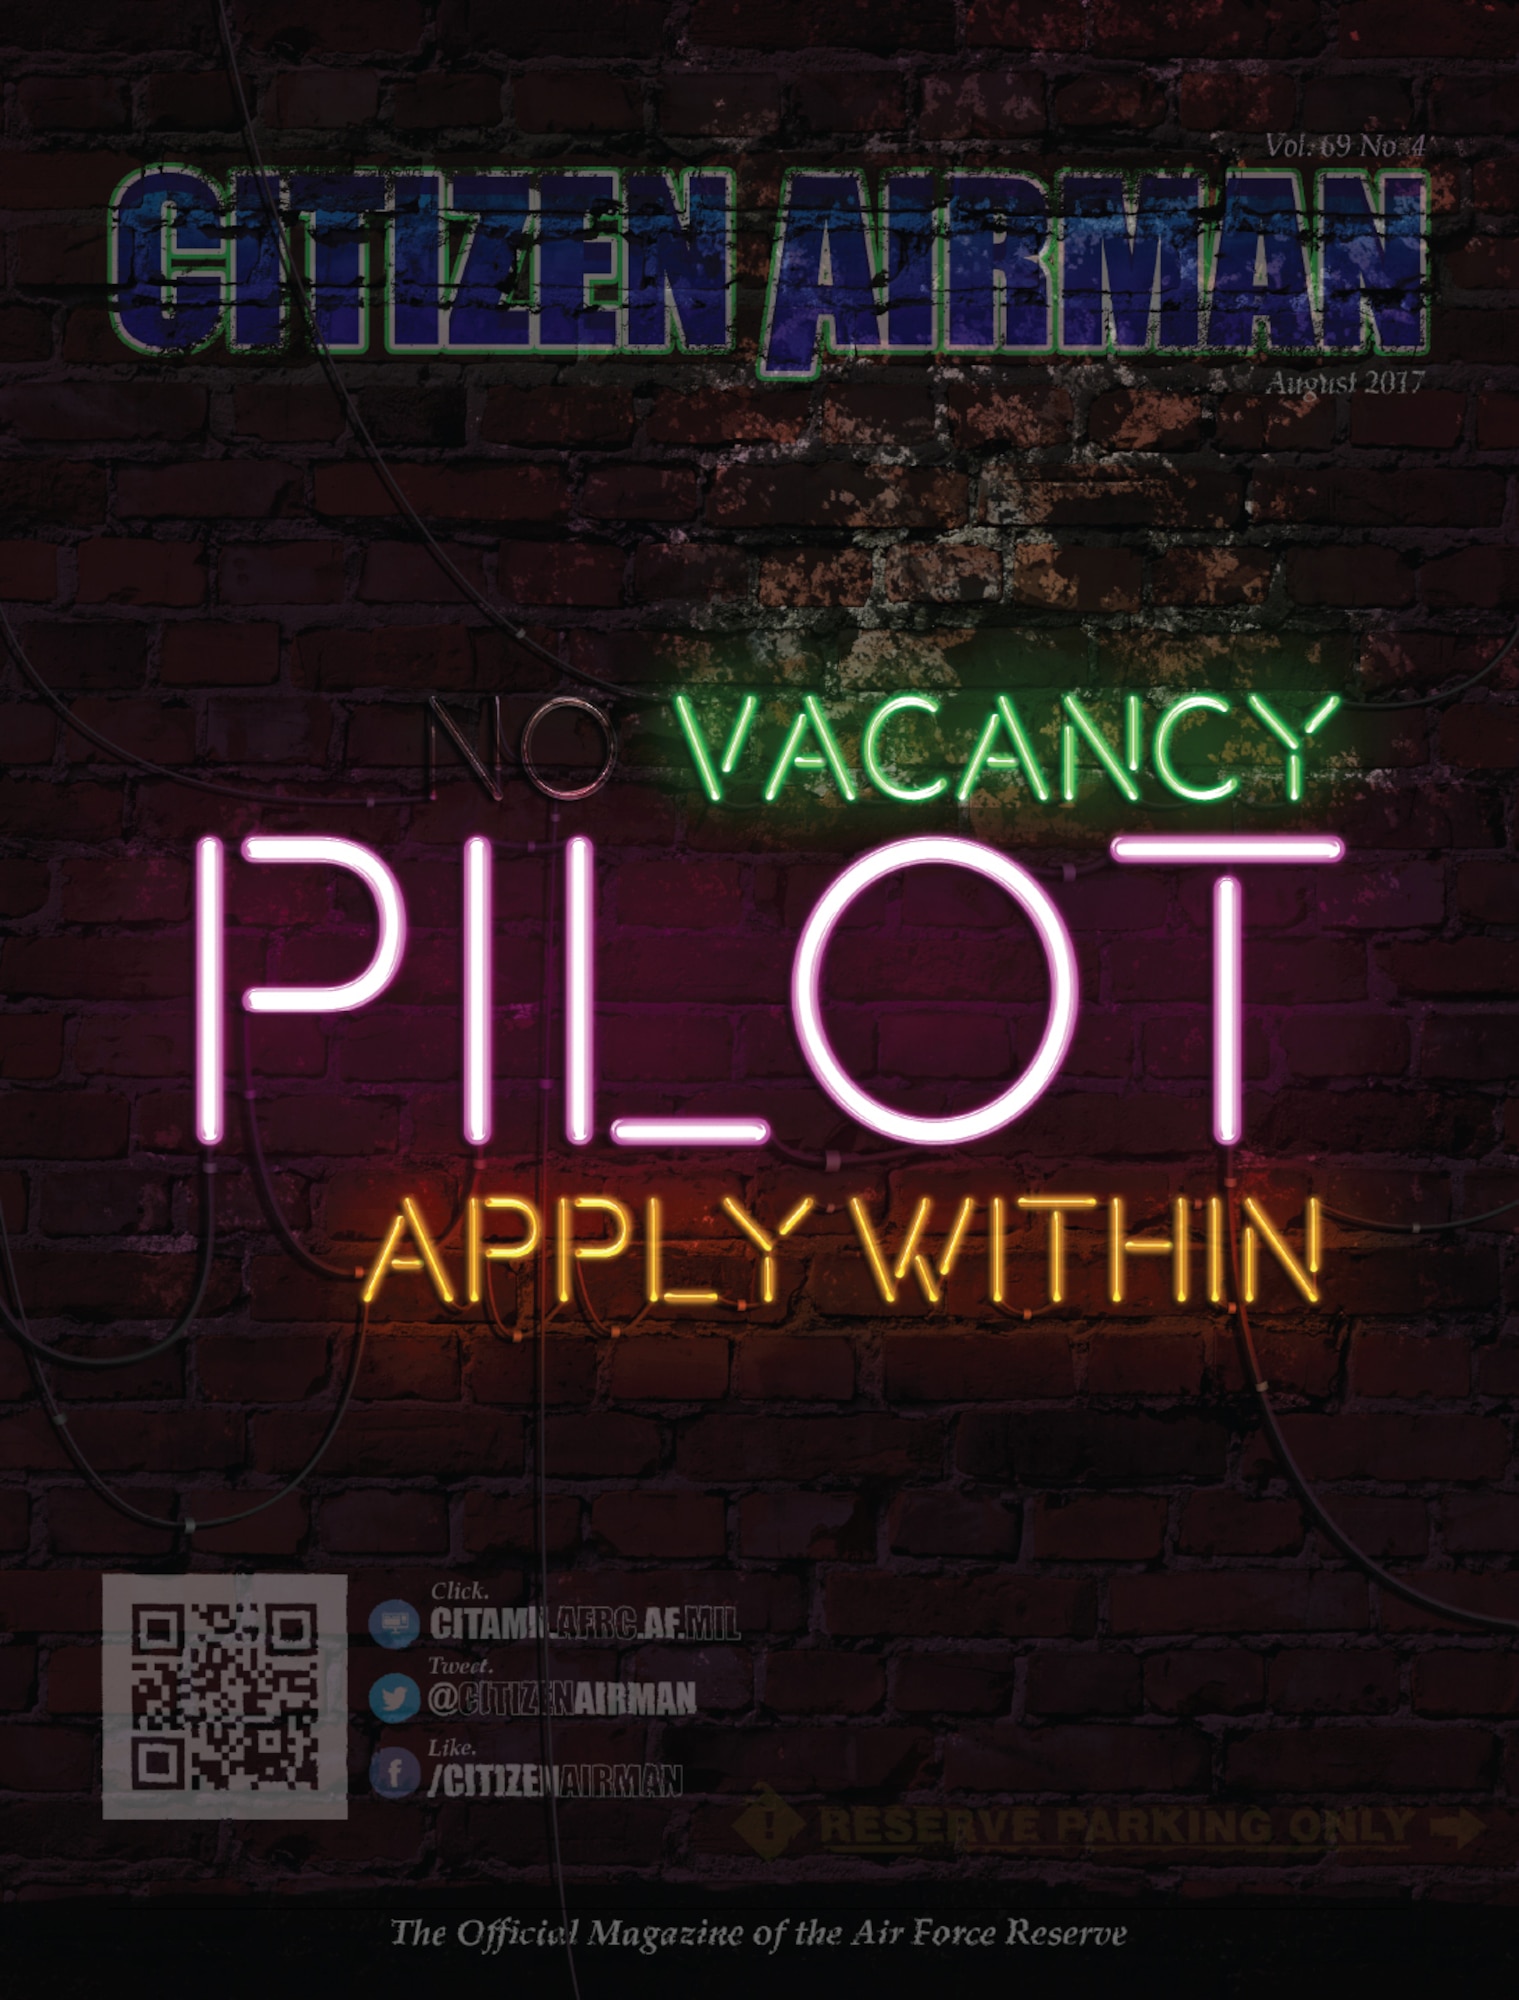 The August issue of Citizen Airman magazine is available on the web at http://www.citamn.afrc.af.mil/.